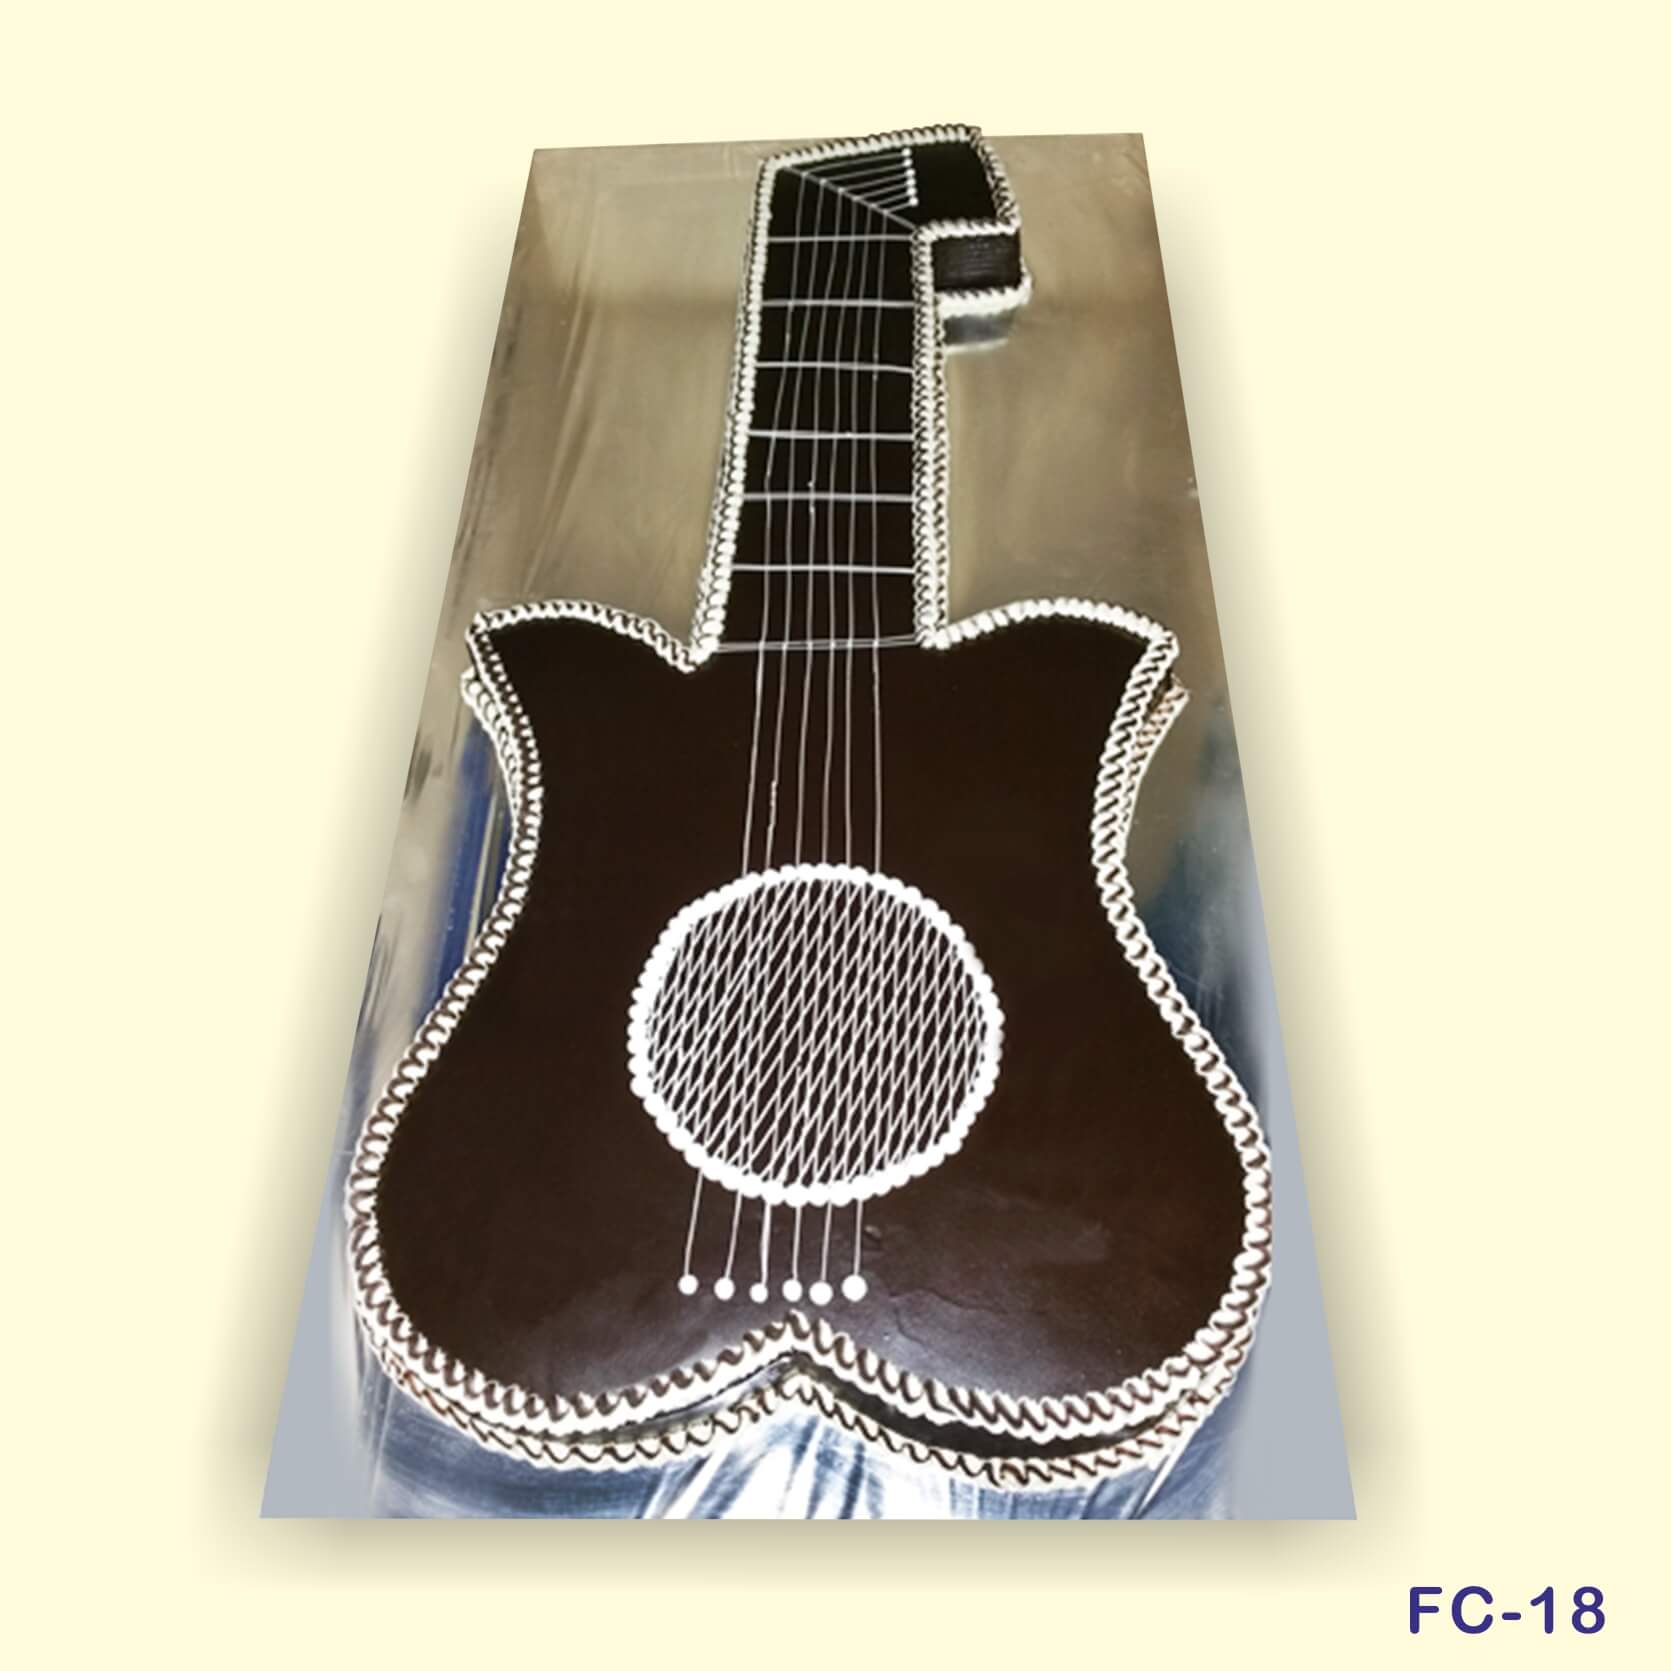 Acoustic Guitar Cake I had the honor to make for a special person turning  90 years young. : r/cakedecorating